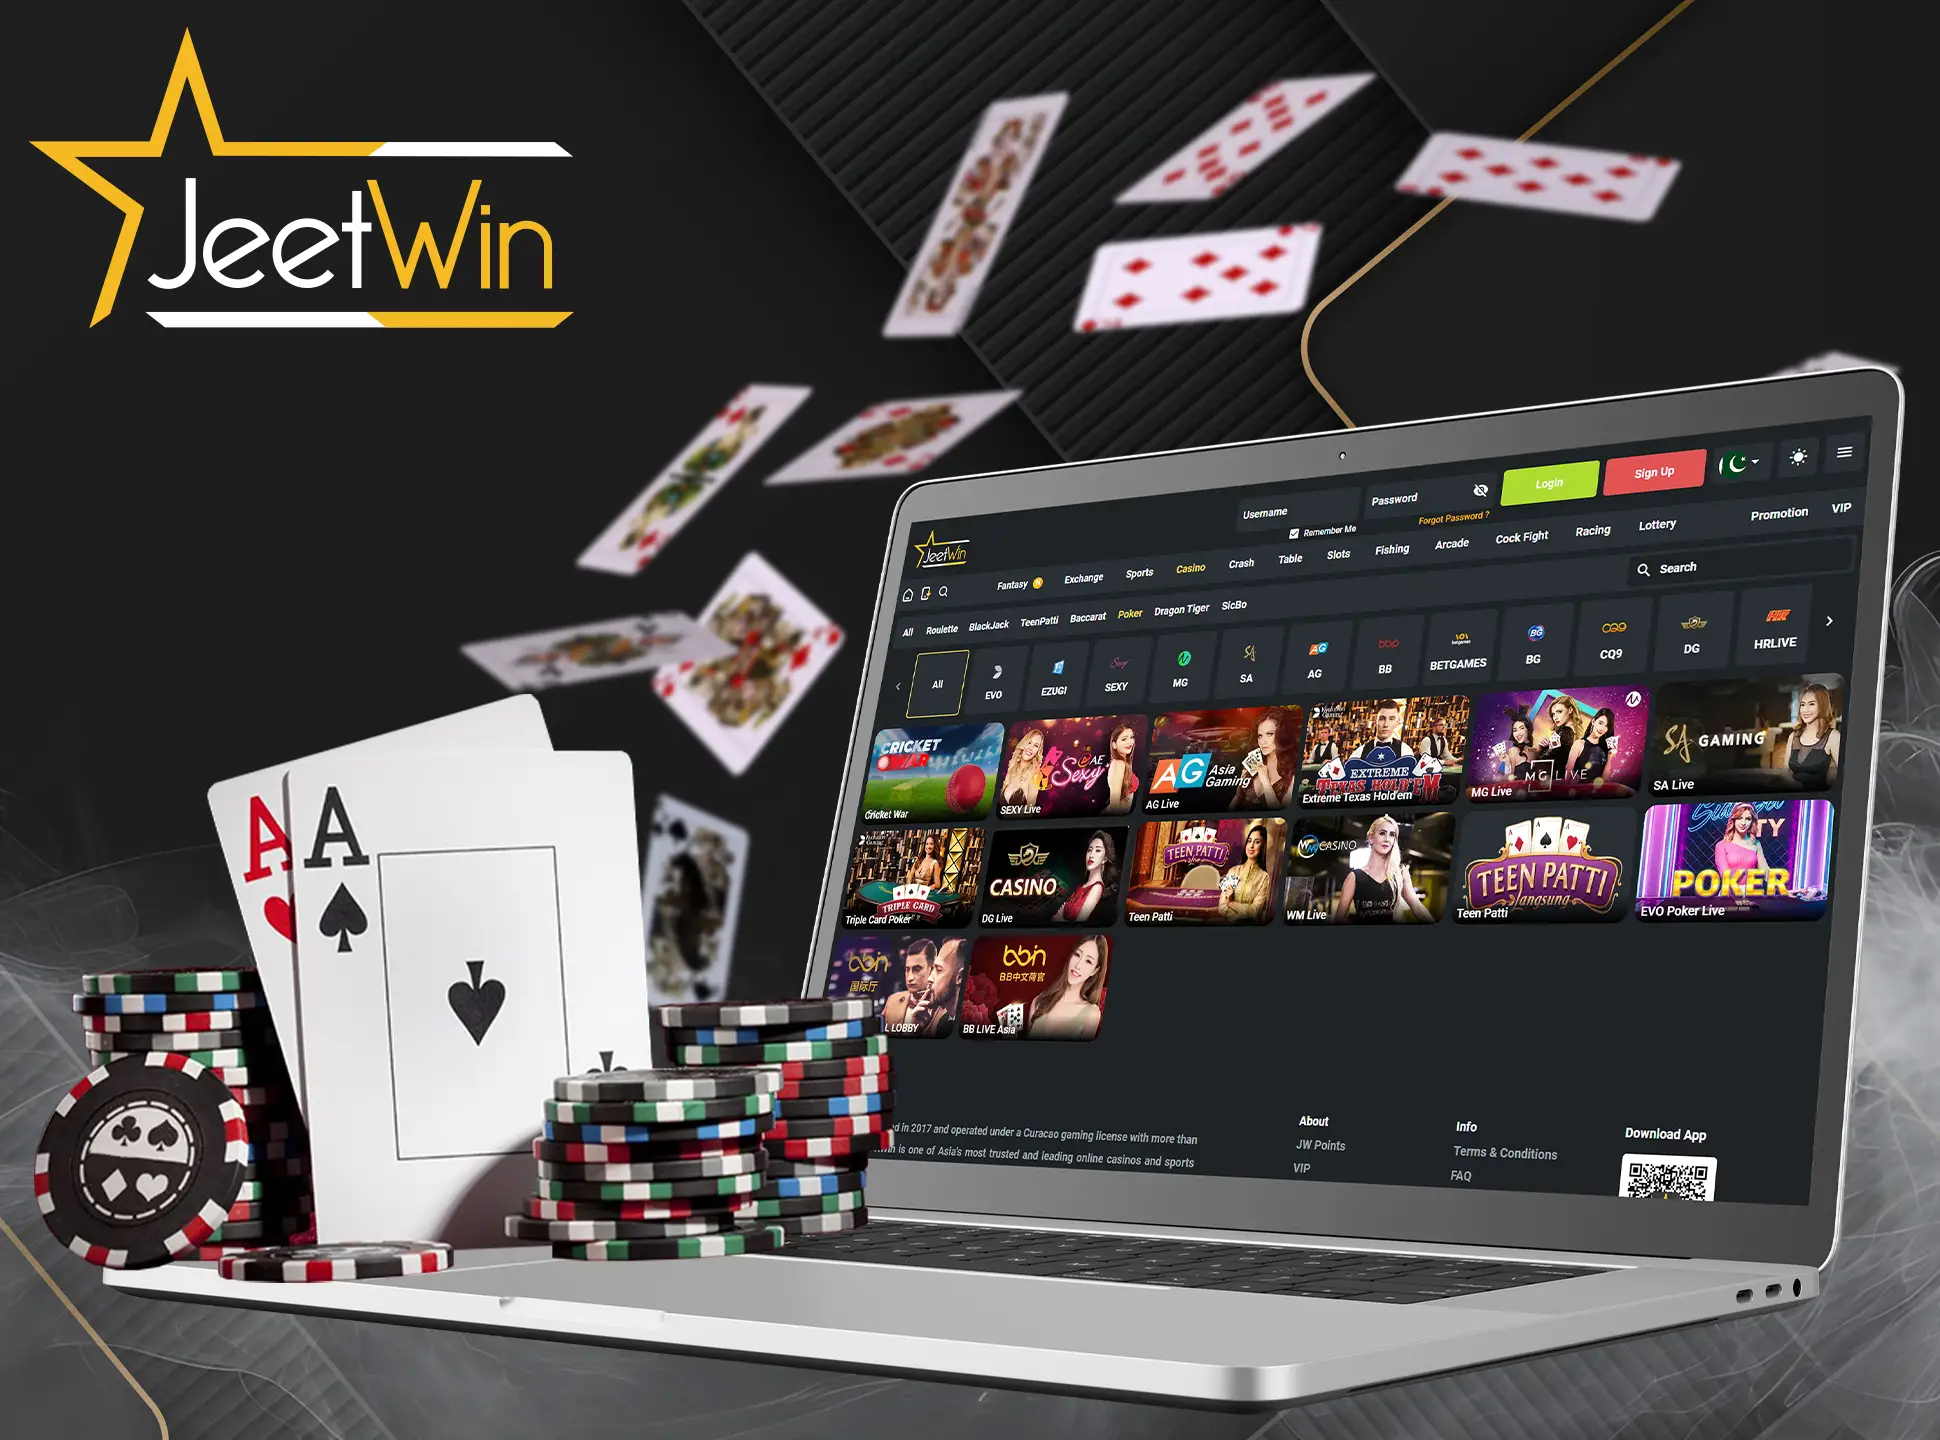 The classic card game Live Poker is now available at JeetWin Casino.